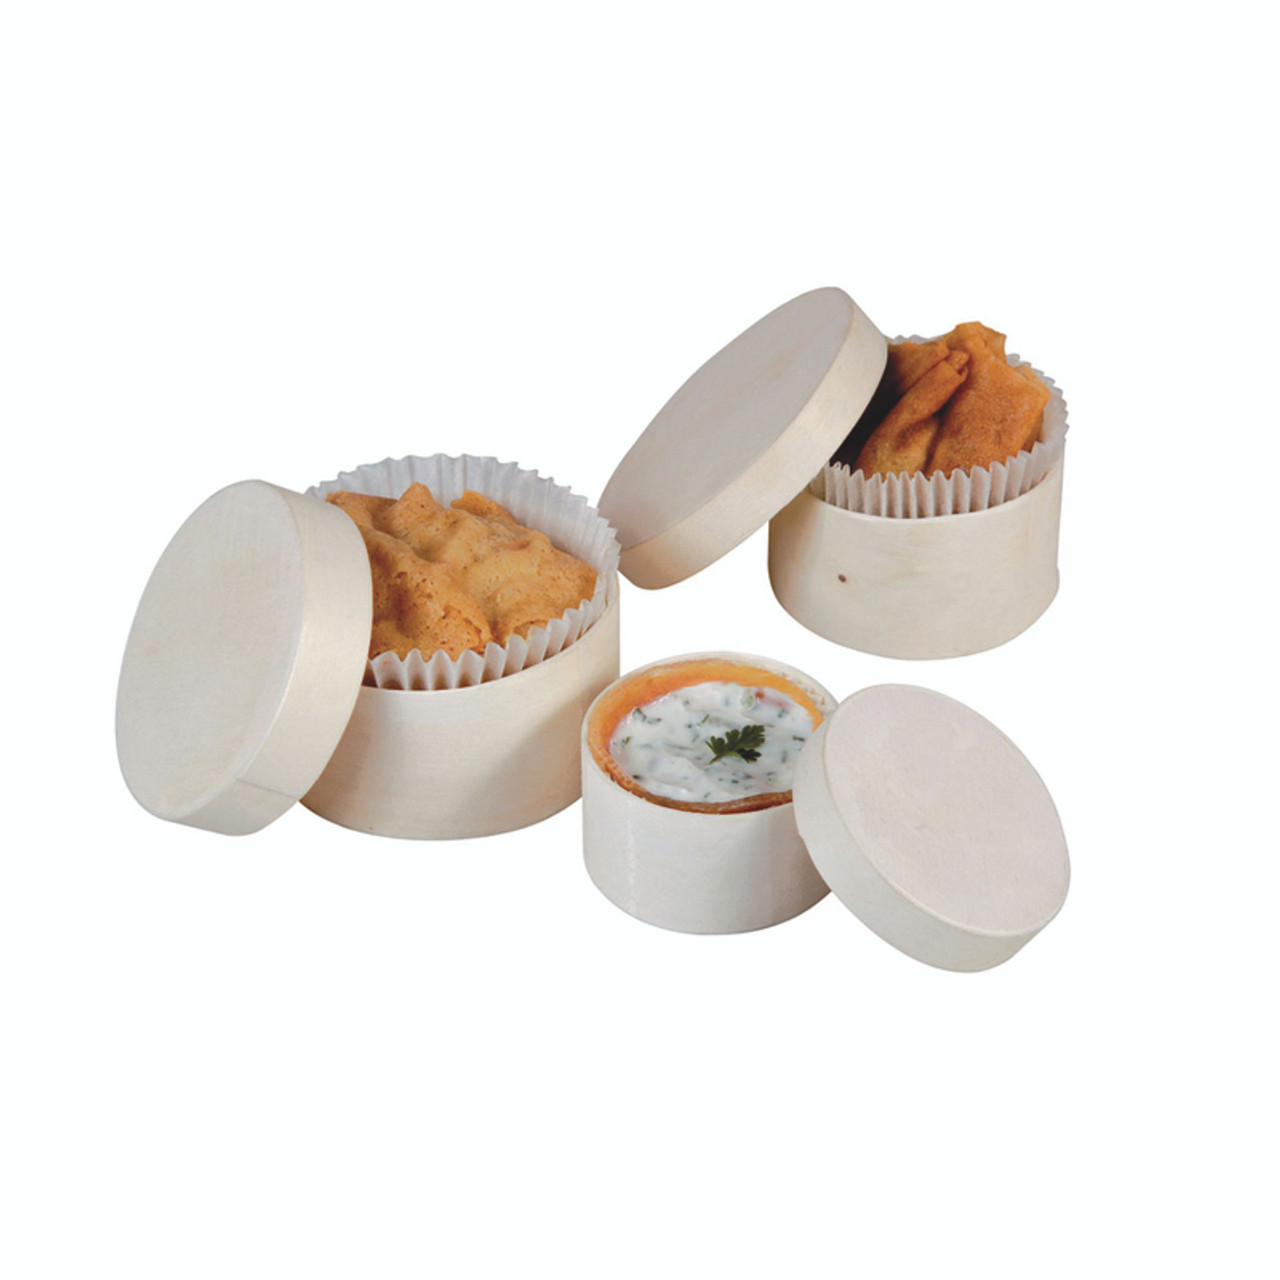 3 Round Wooden Cup Kit 2.5x1.3in 2.3x1.1in 1.9x1in - 96 pcs